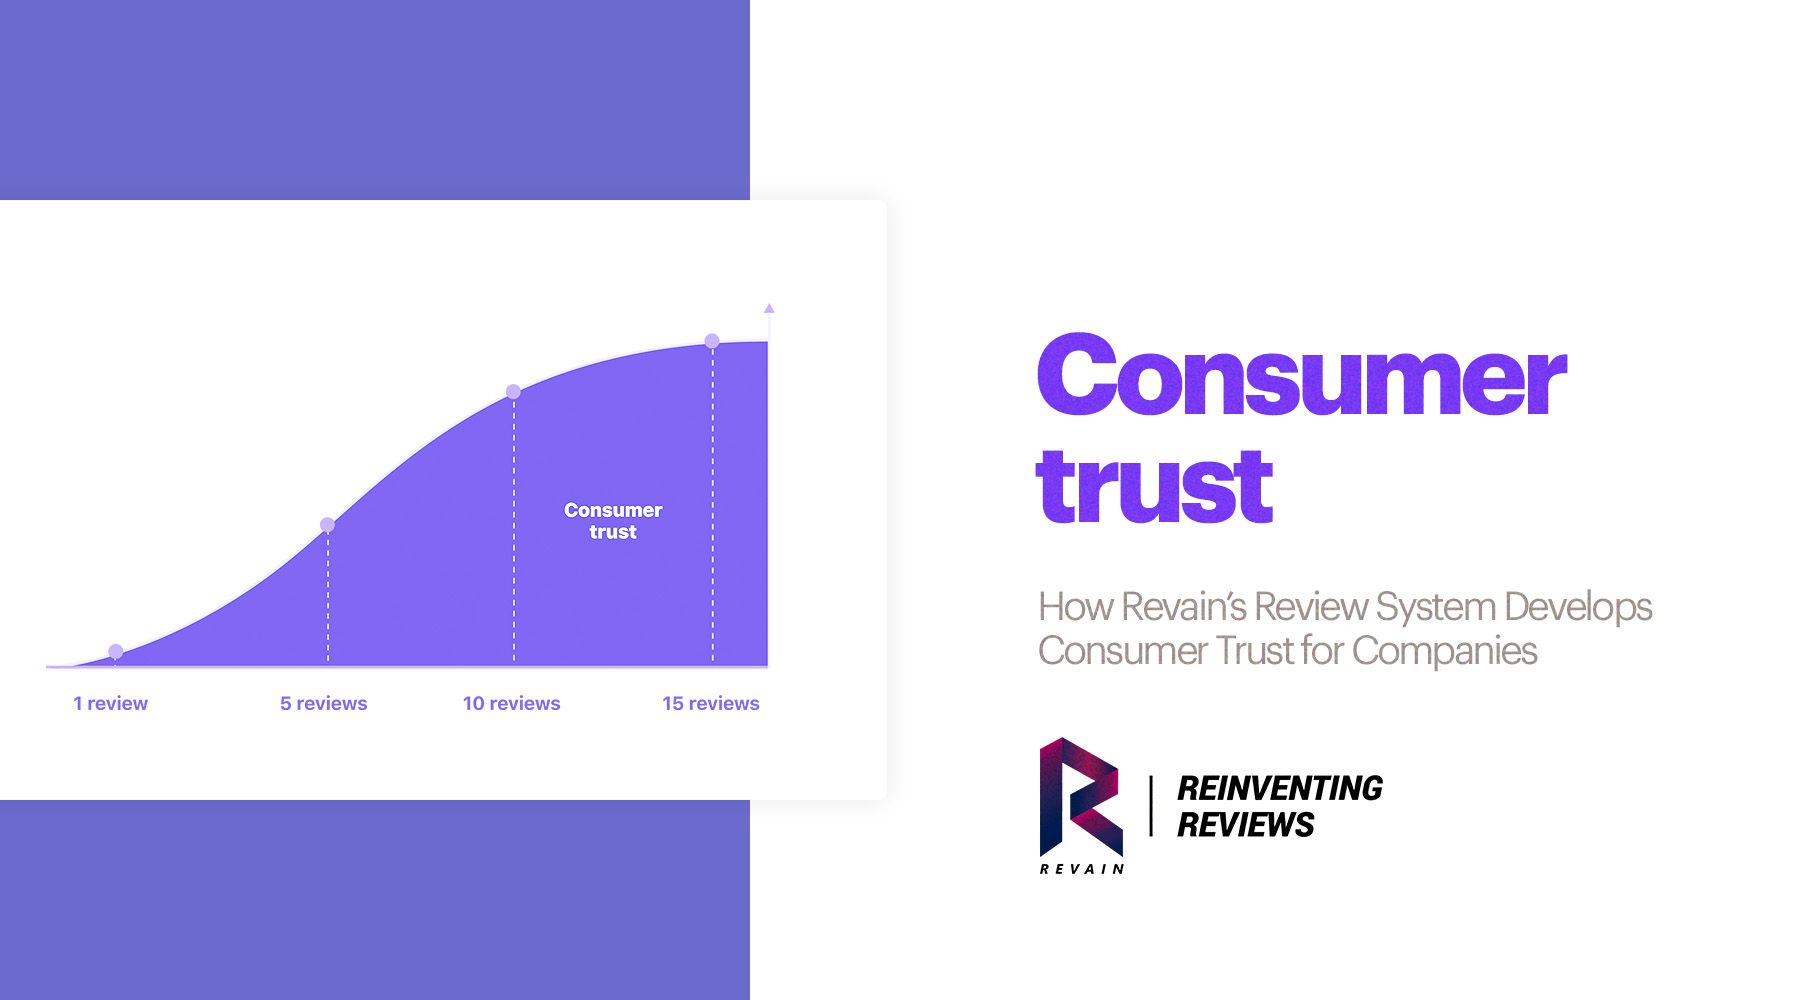 How Revain’s Review System Develops Consumer Trust for Companies